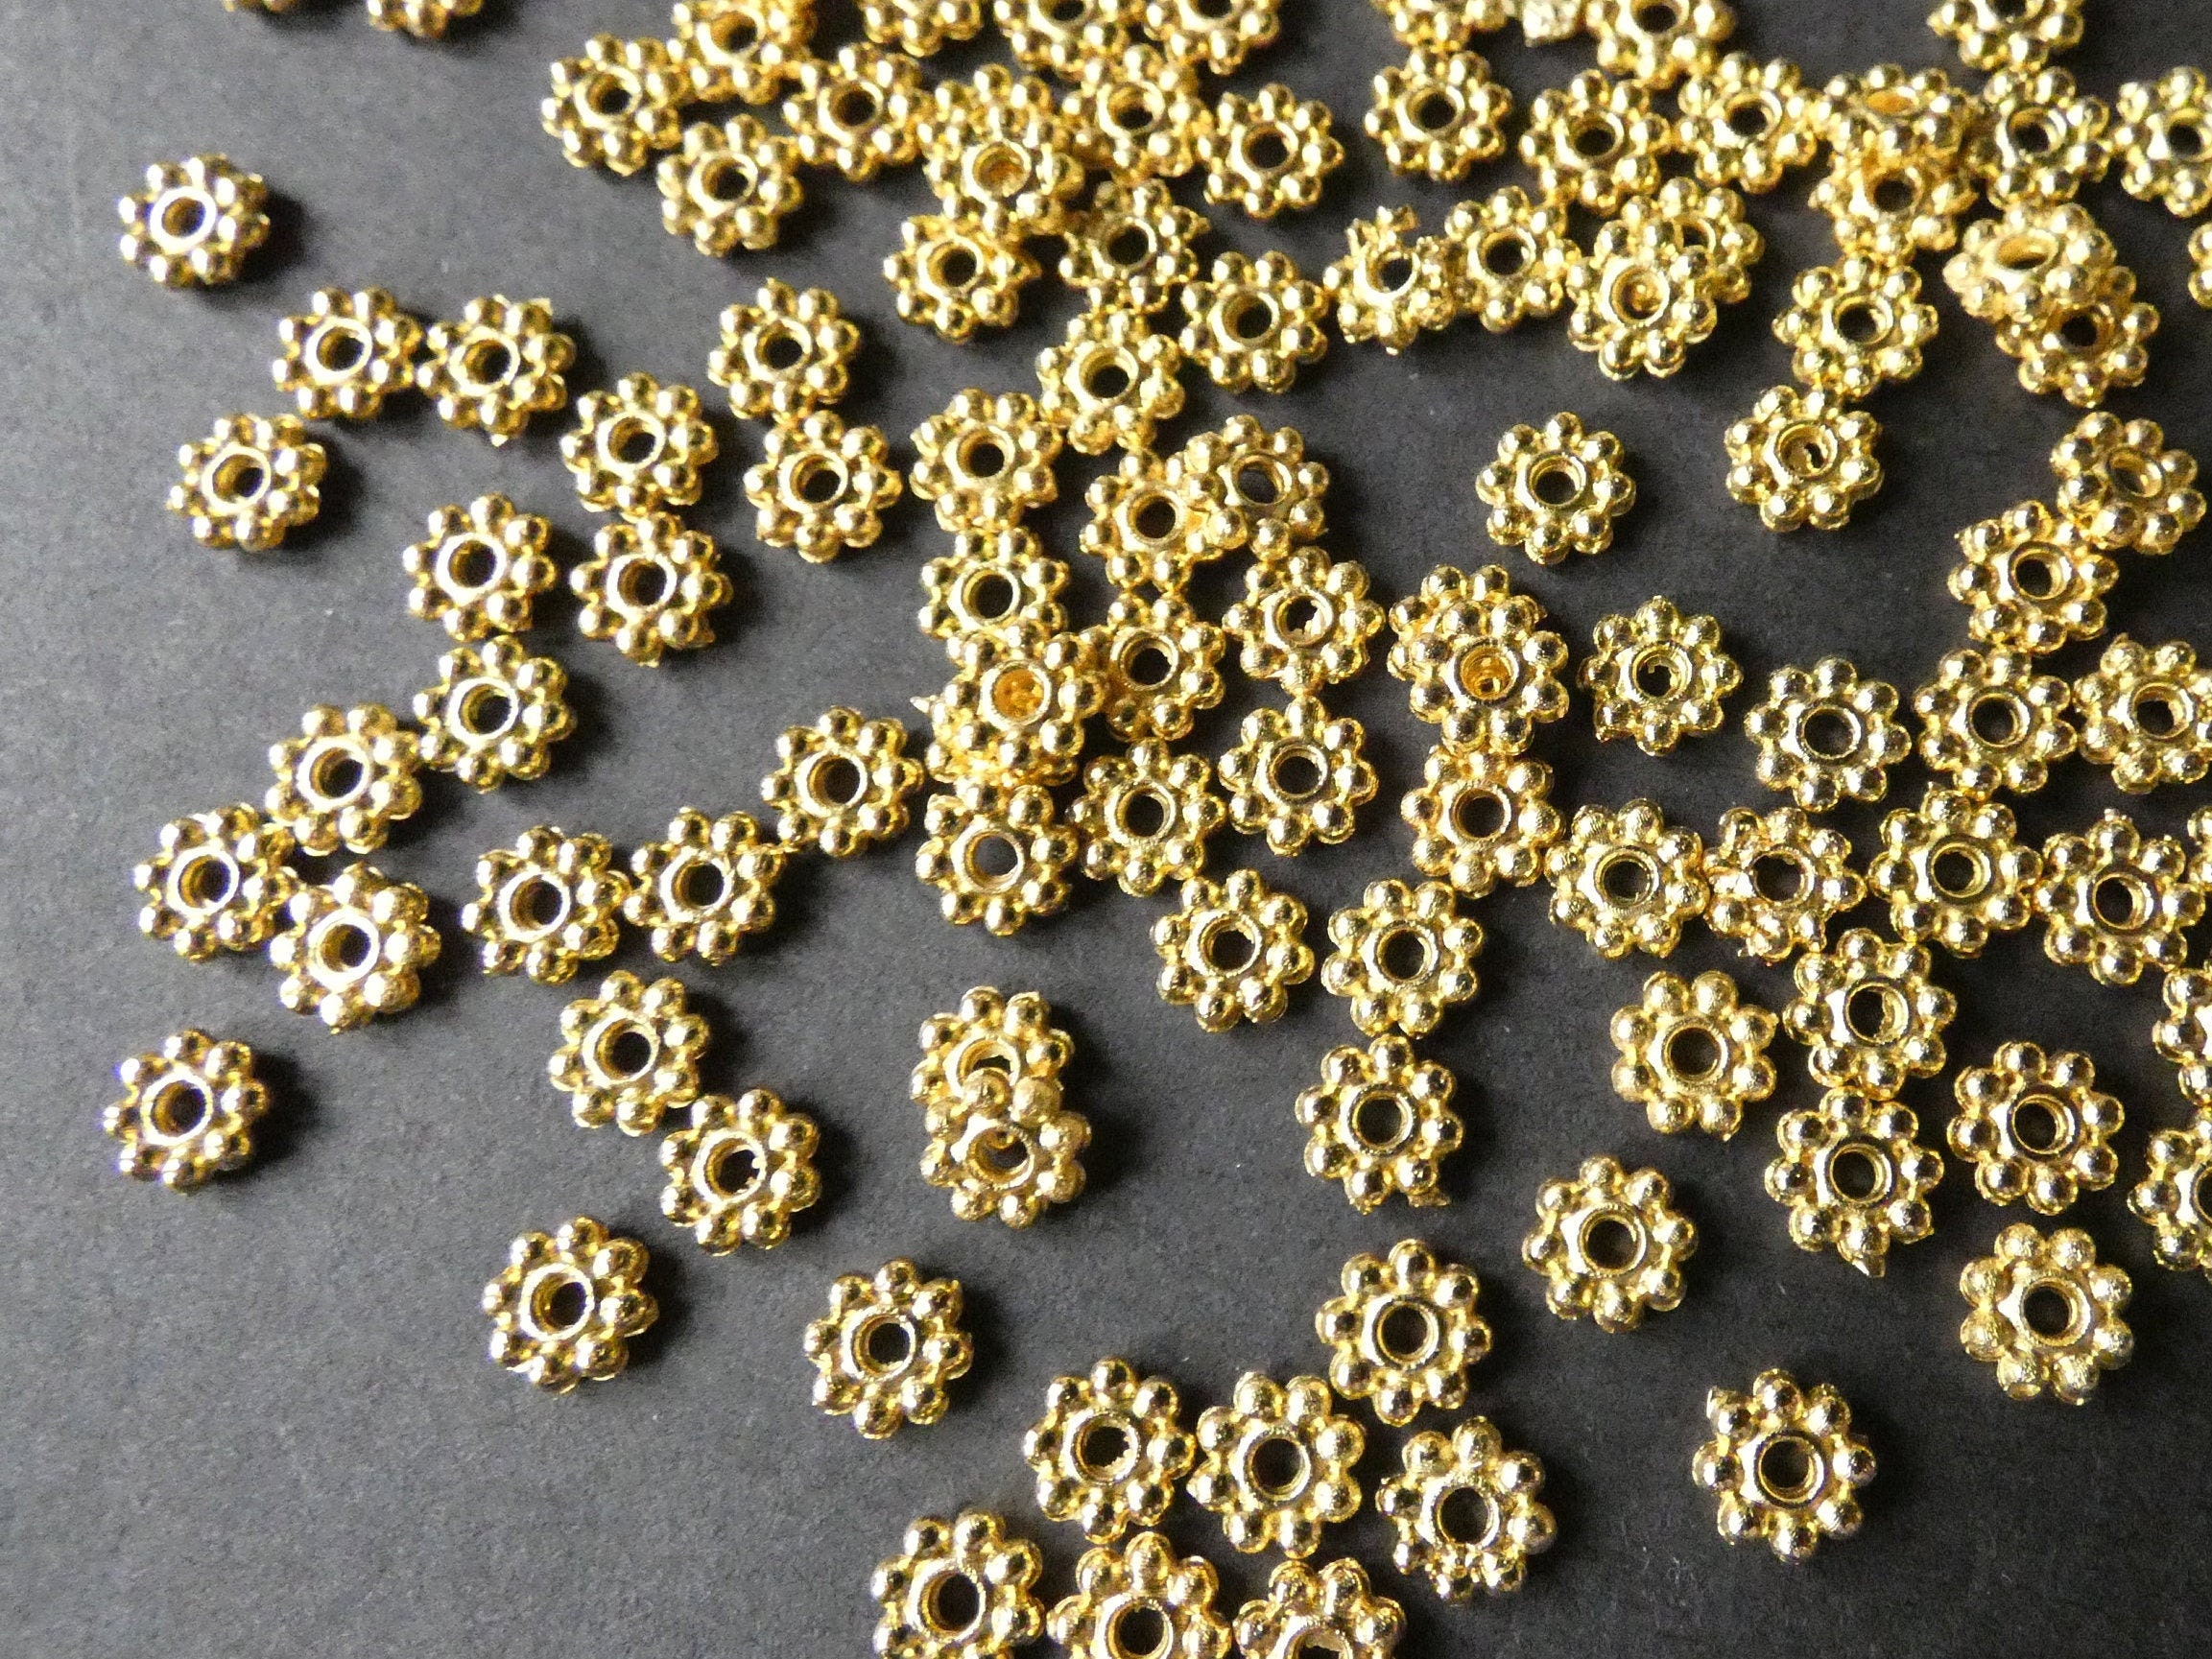 Indonesian style spacer beads, antique gold beads, antique gold, spacer  beads, metal beads, rondelle, beads, jewelry spacer beads, 5x4mm beads,  jewelry making, vintage supplies, jewelry supplies, gold spacer beads,  B'sue Boutiques, jewelry